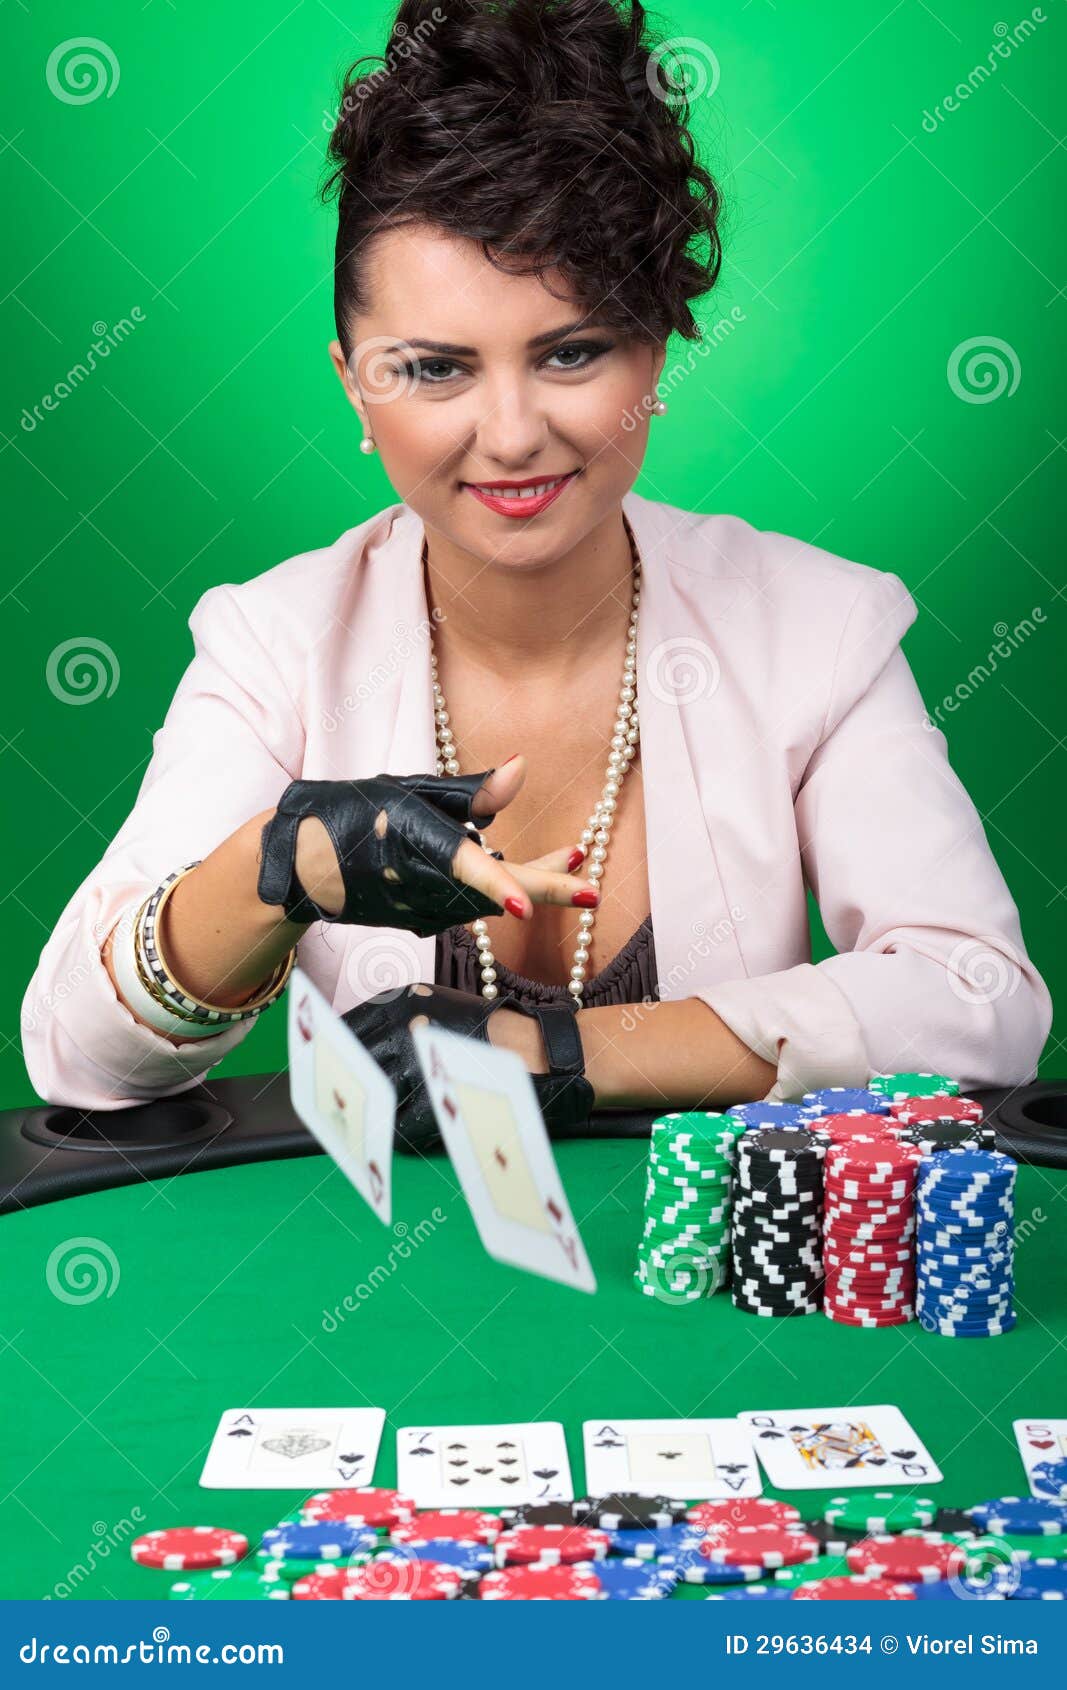 Woman showing her cards stock photo. Image of aces, casino - 29636434